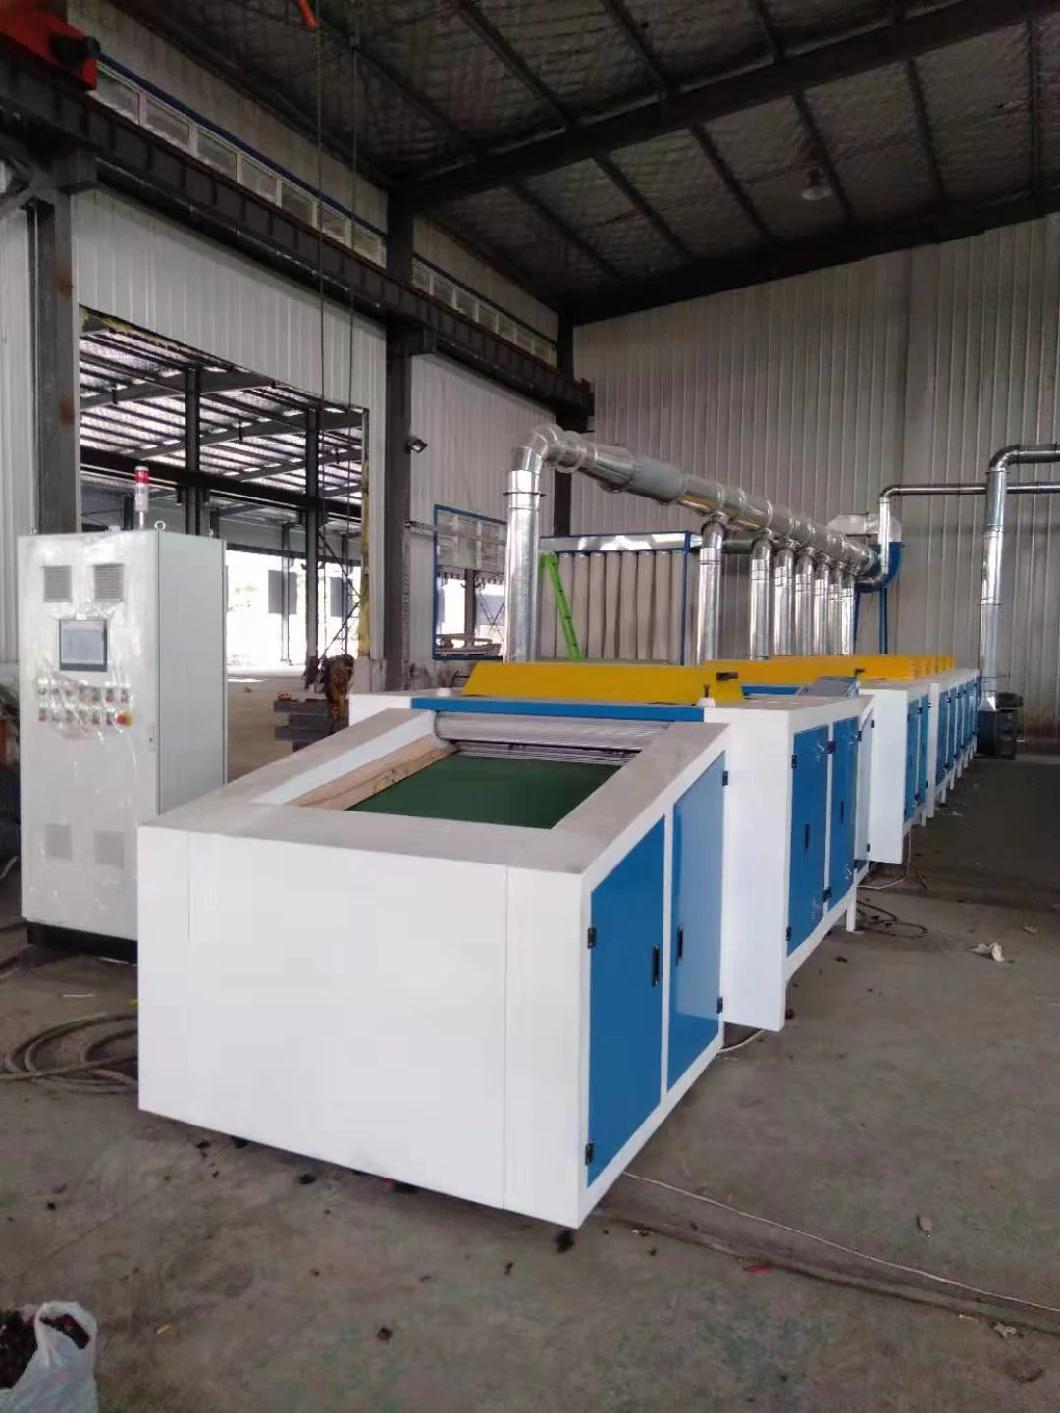 New Design High Capacity Textile Recycling Machine with Machine Cover and 7 Rollers